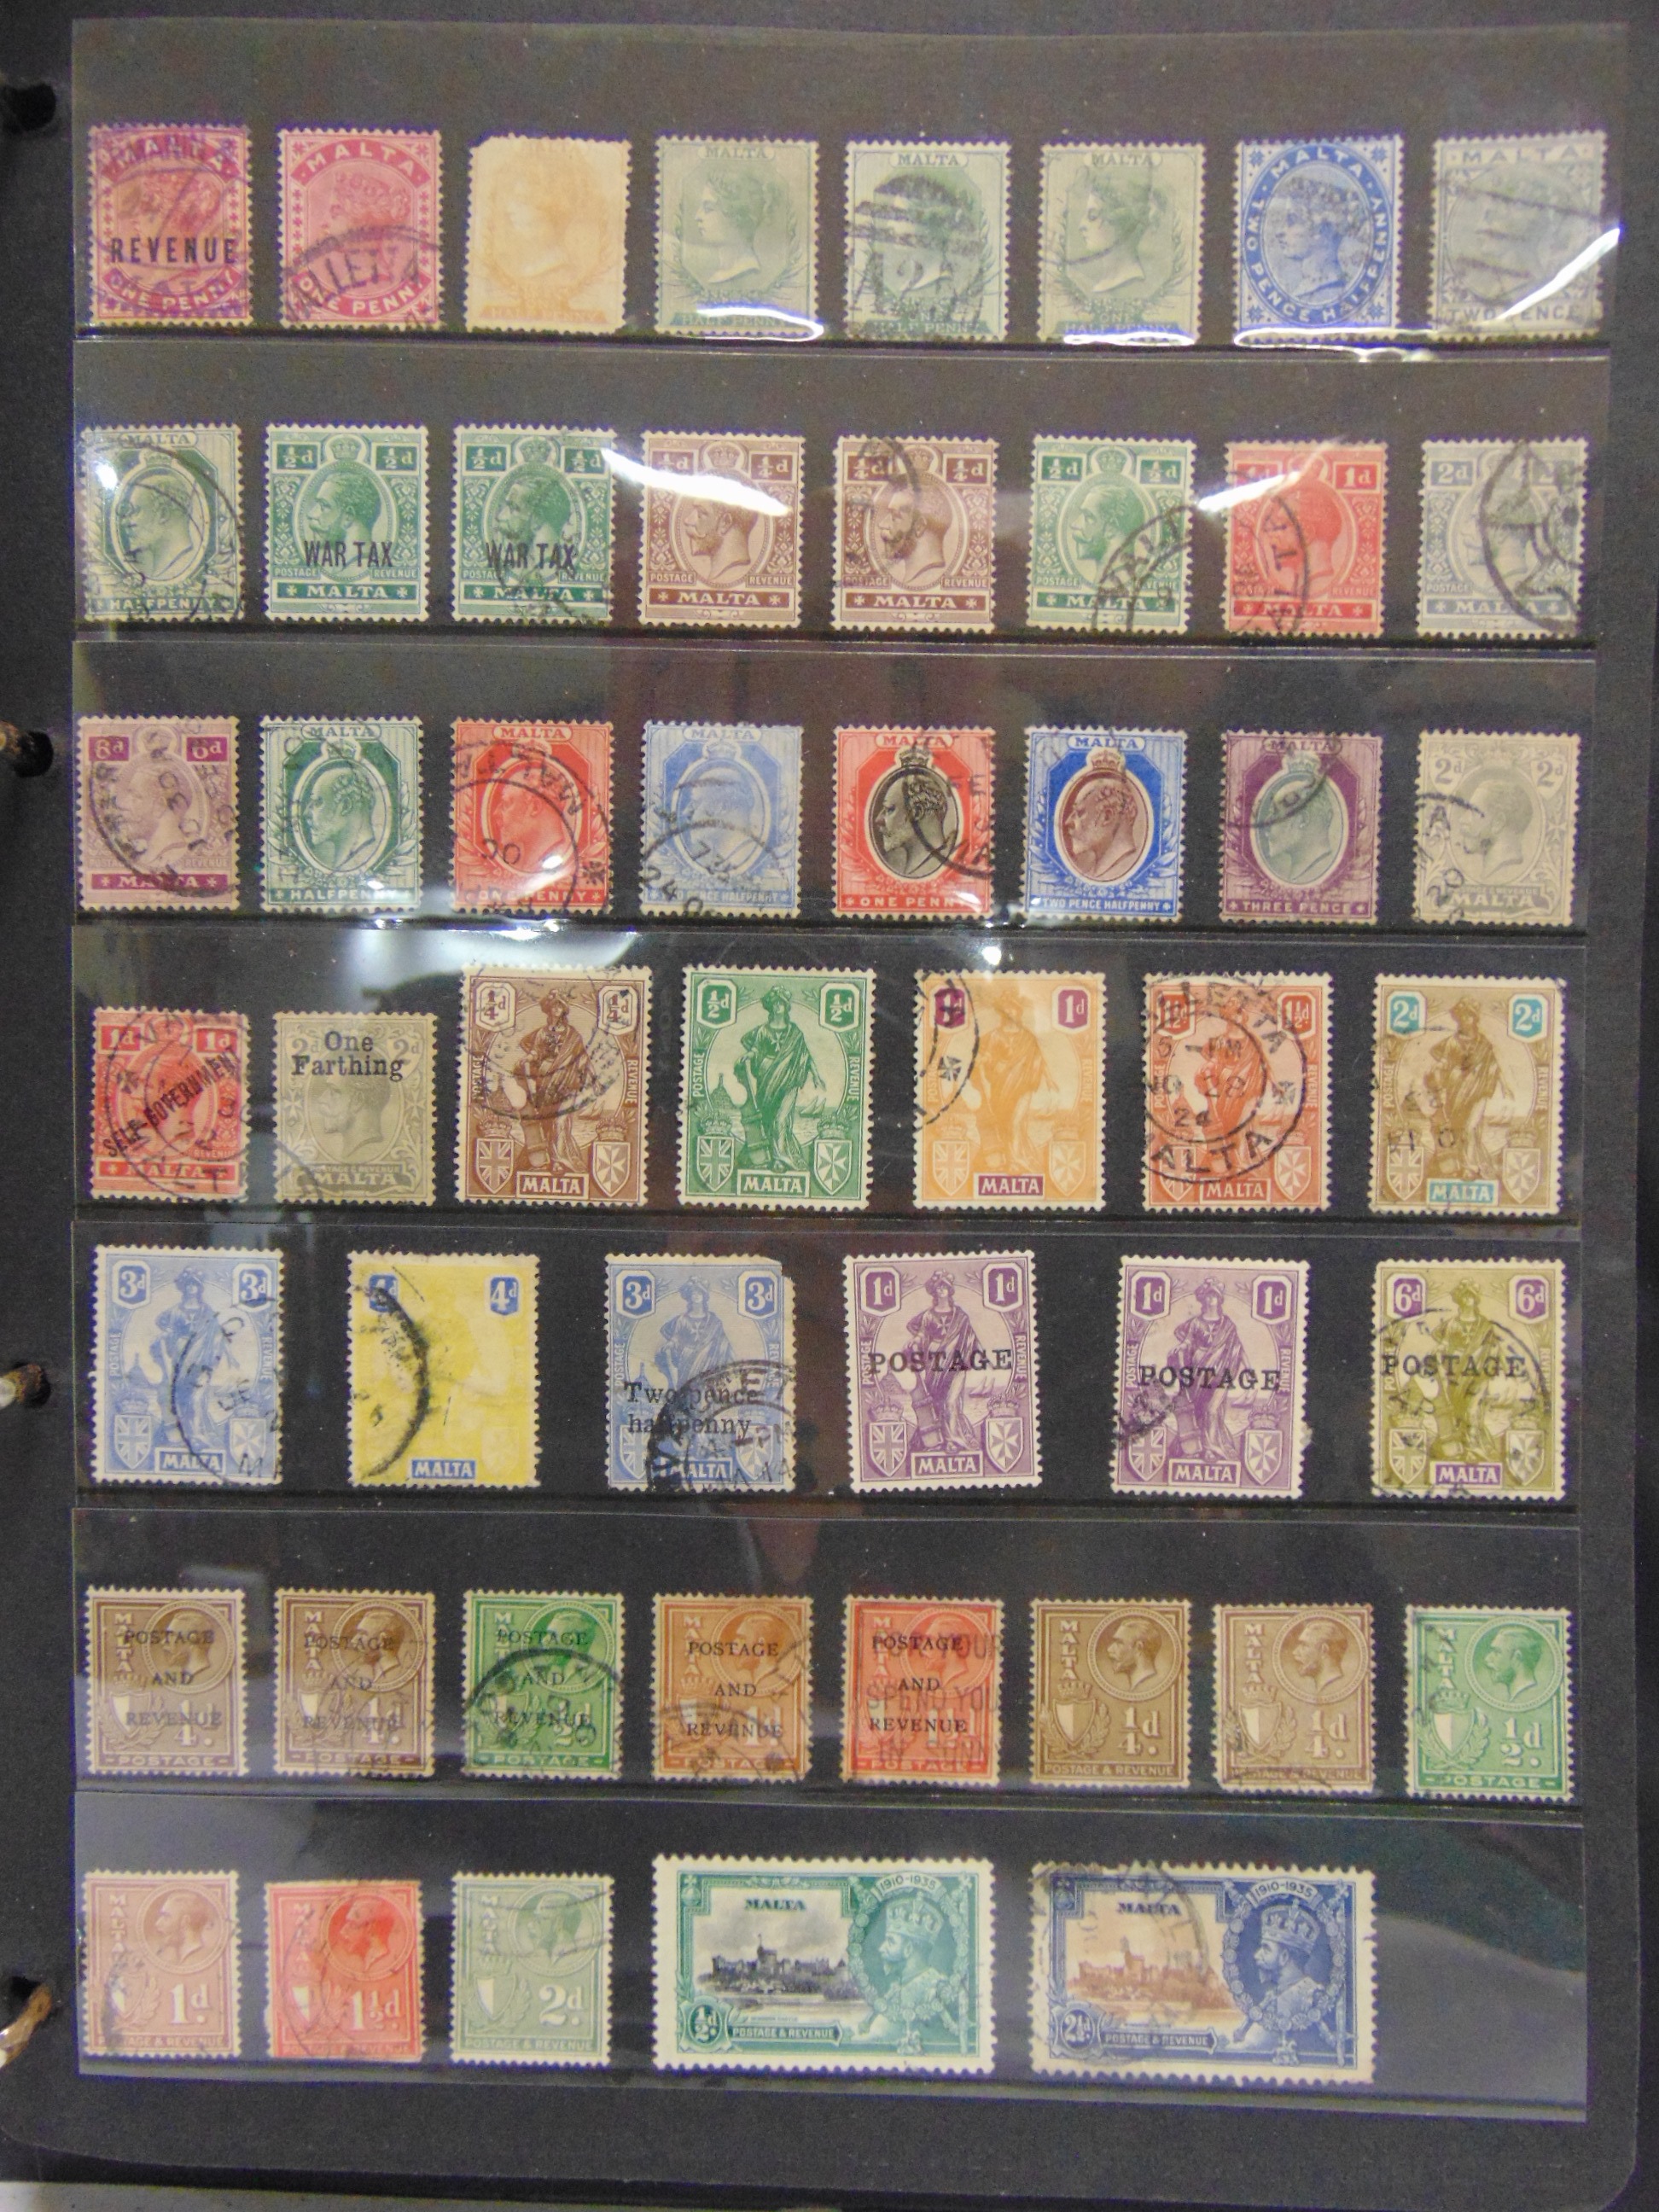 STAMPS - A PART-WORLD COLLECTION including India, Jamaica, Montserrat, Nyasaland / Malawi, Straits - Image 2 of 6